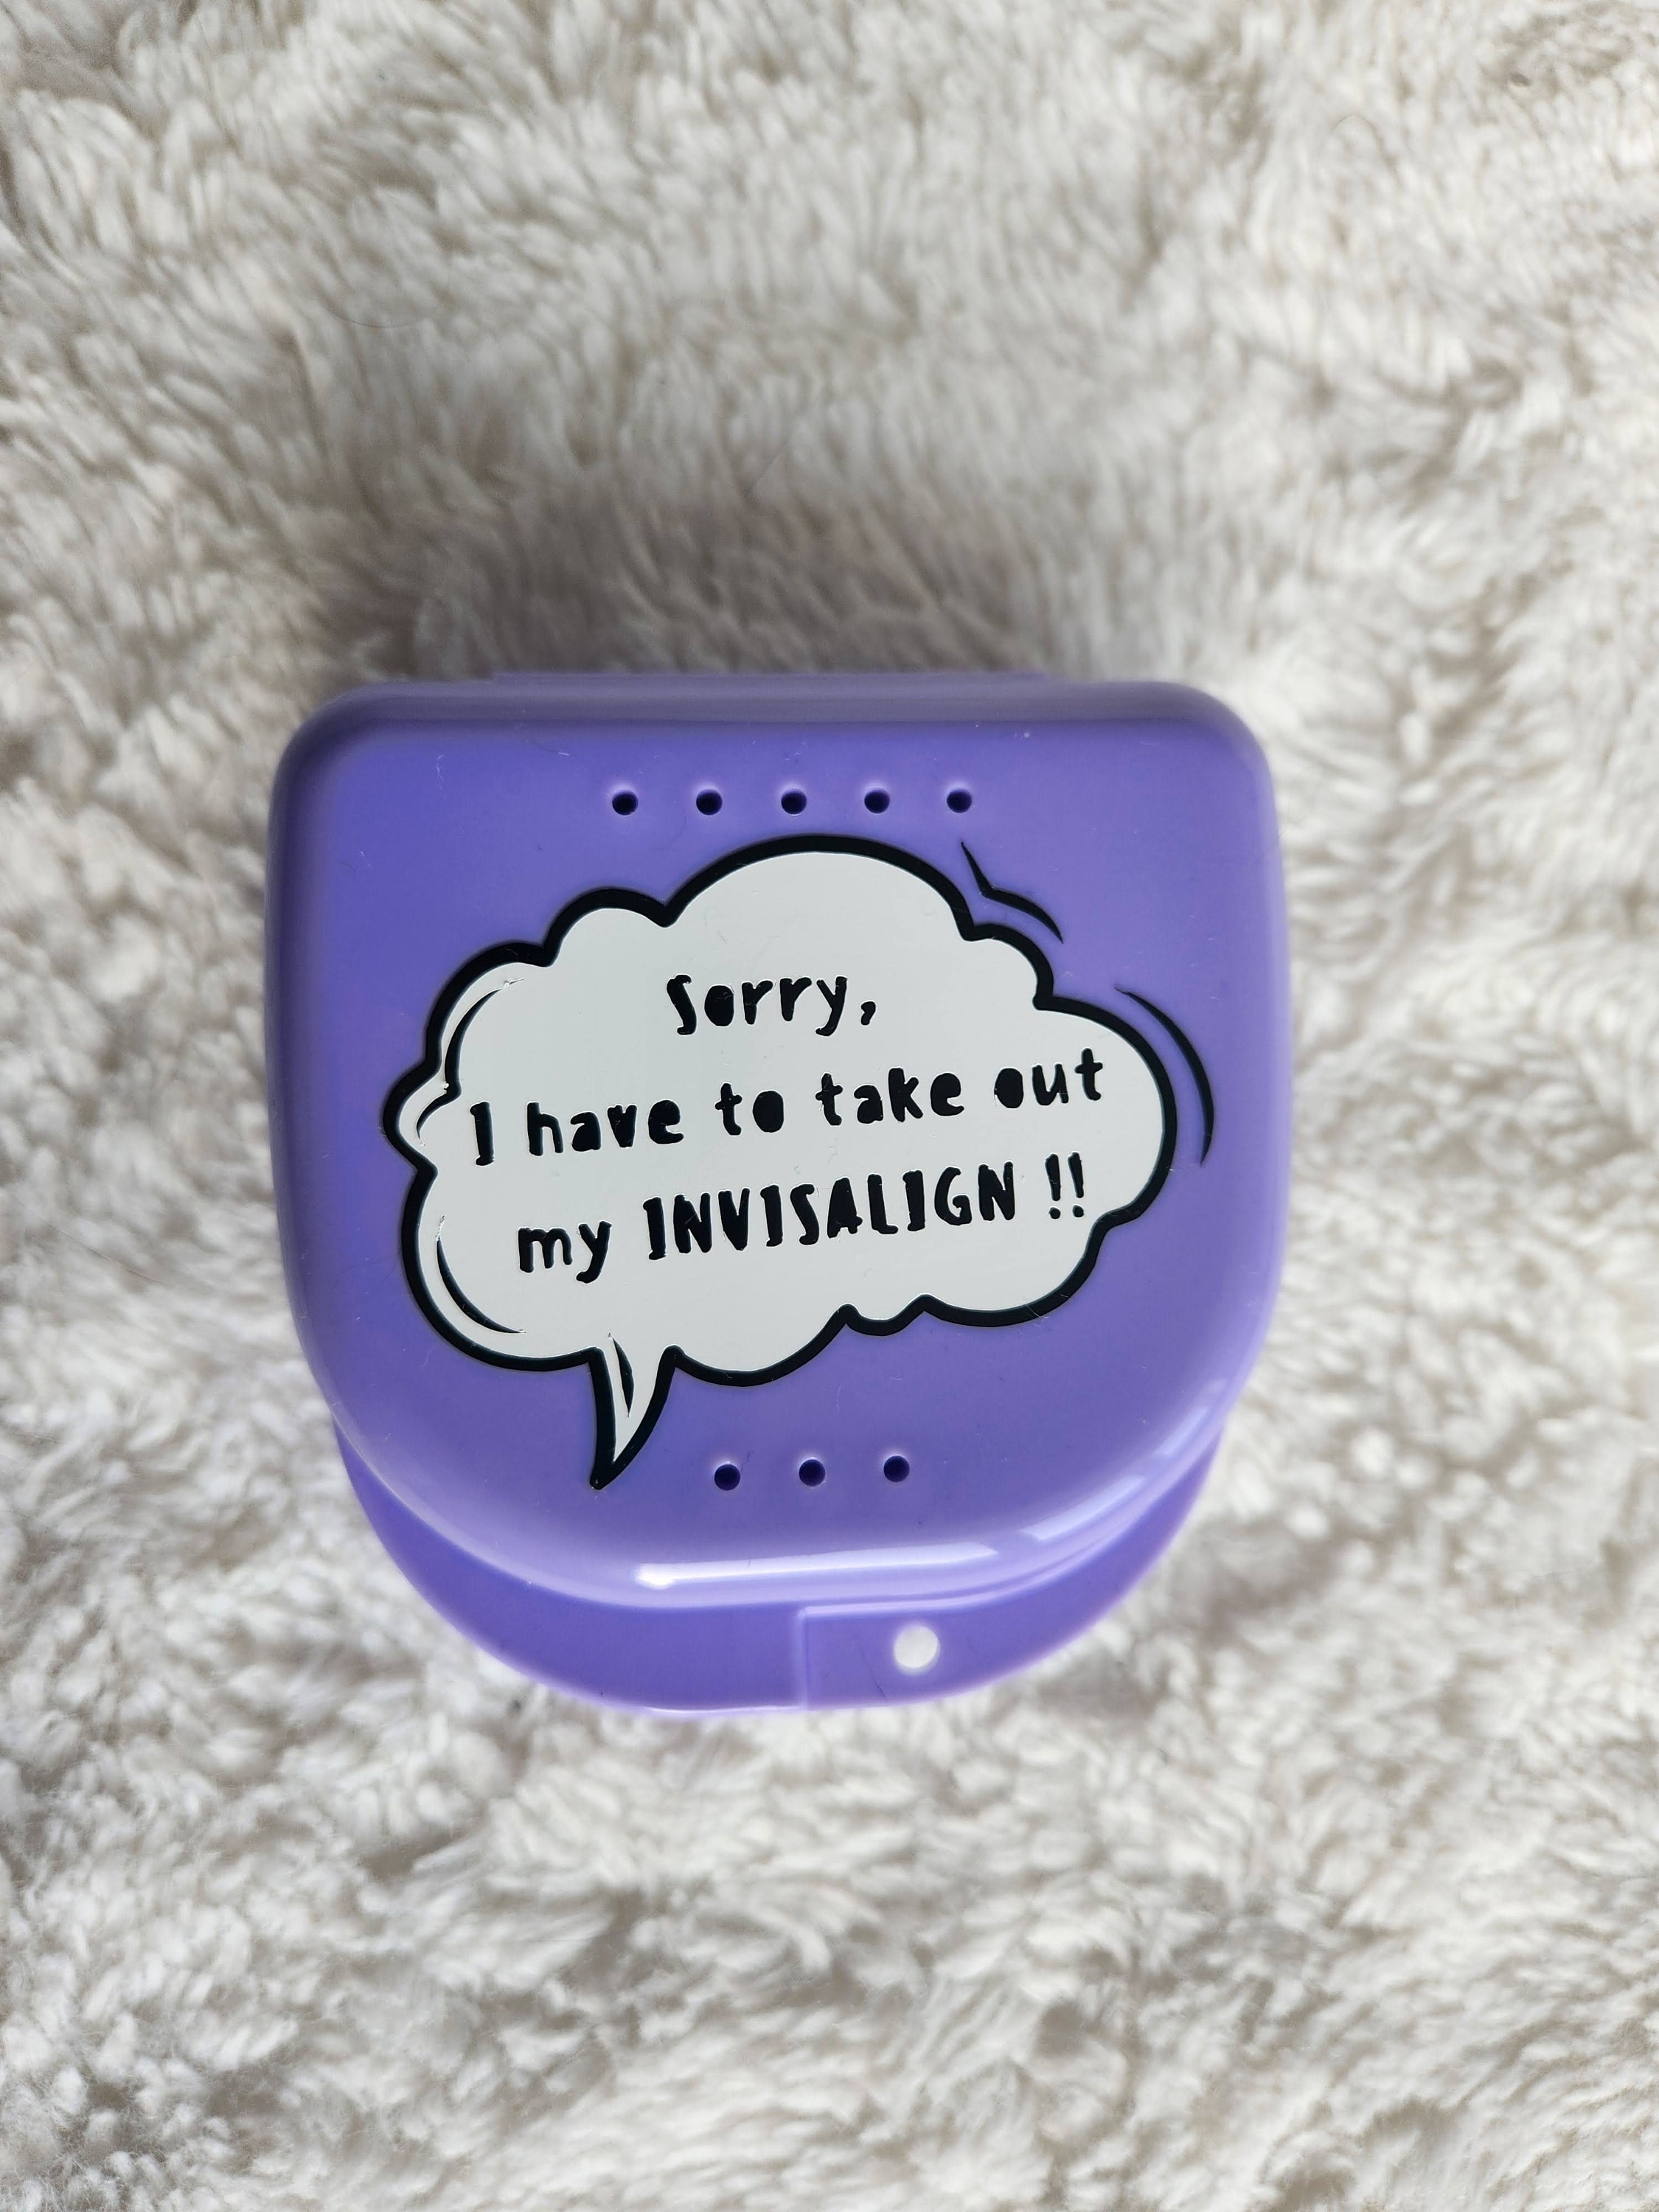 Invisalign Retainer Aligner Purple Case With Mirror Cute Design Funny Quote  Sturdy Good Quality Great Quality With Key Chain Hooks -  UK